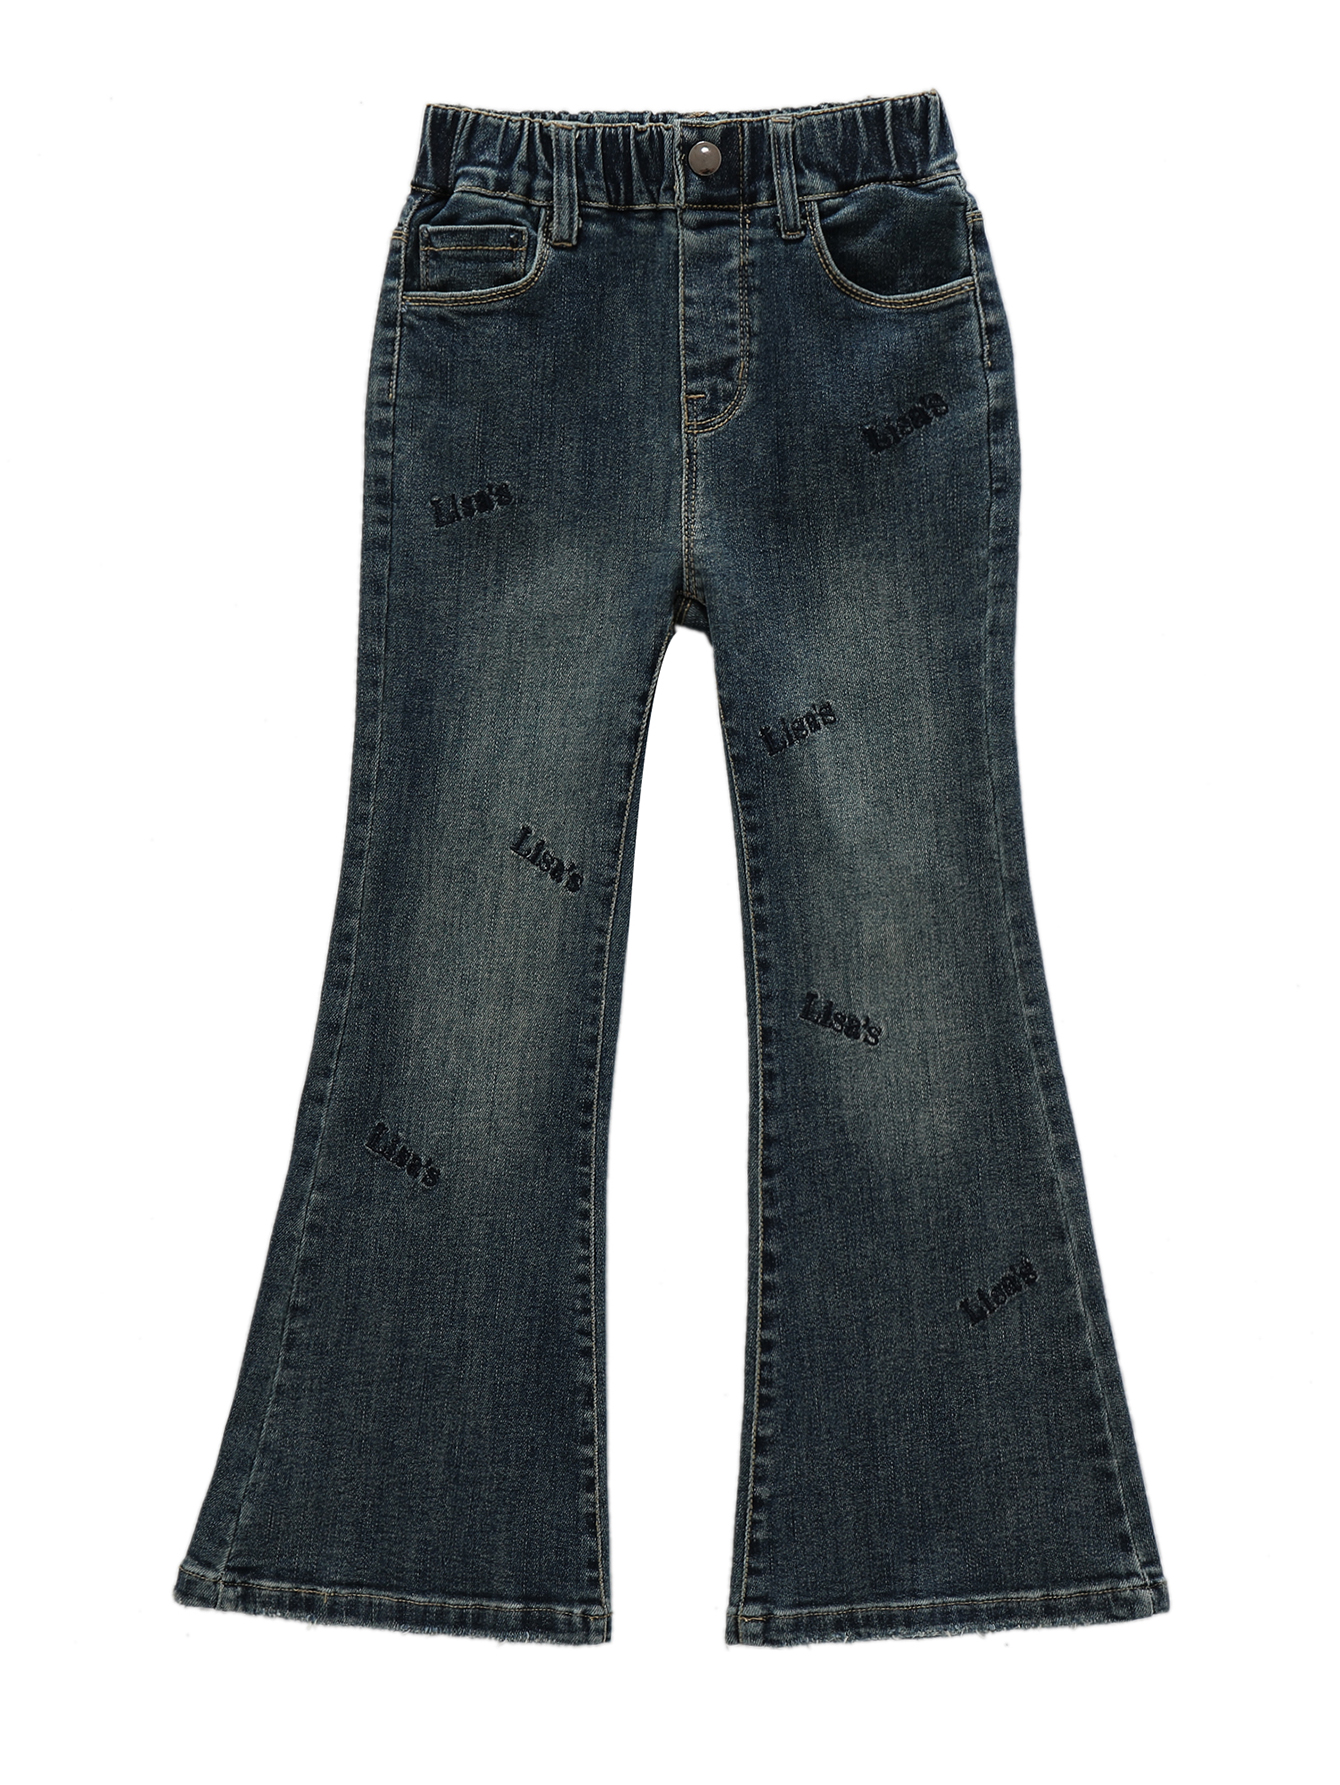 word pattern design organic rock and republic tractor kids jeans bell-bottoms pants free sample